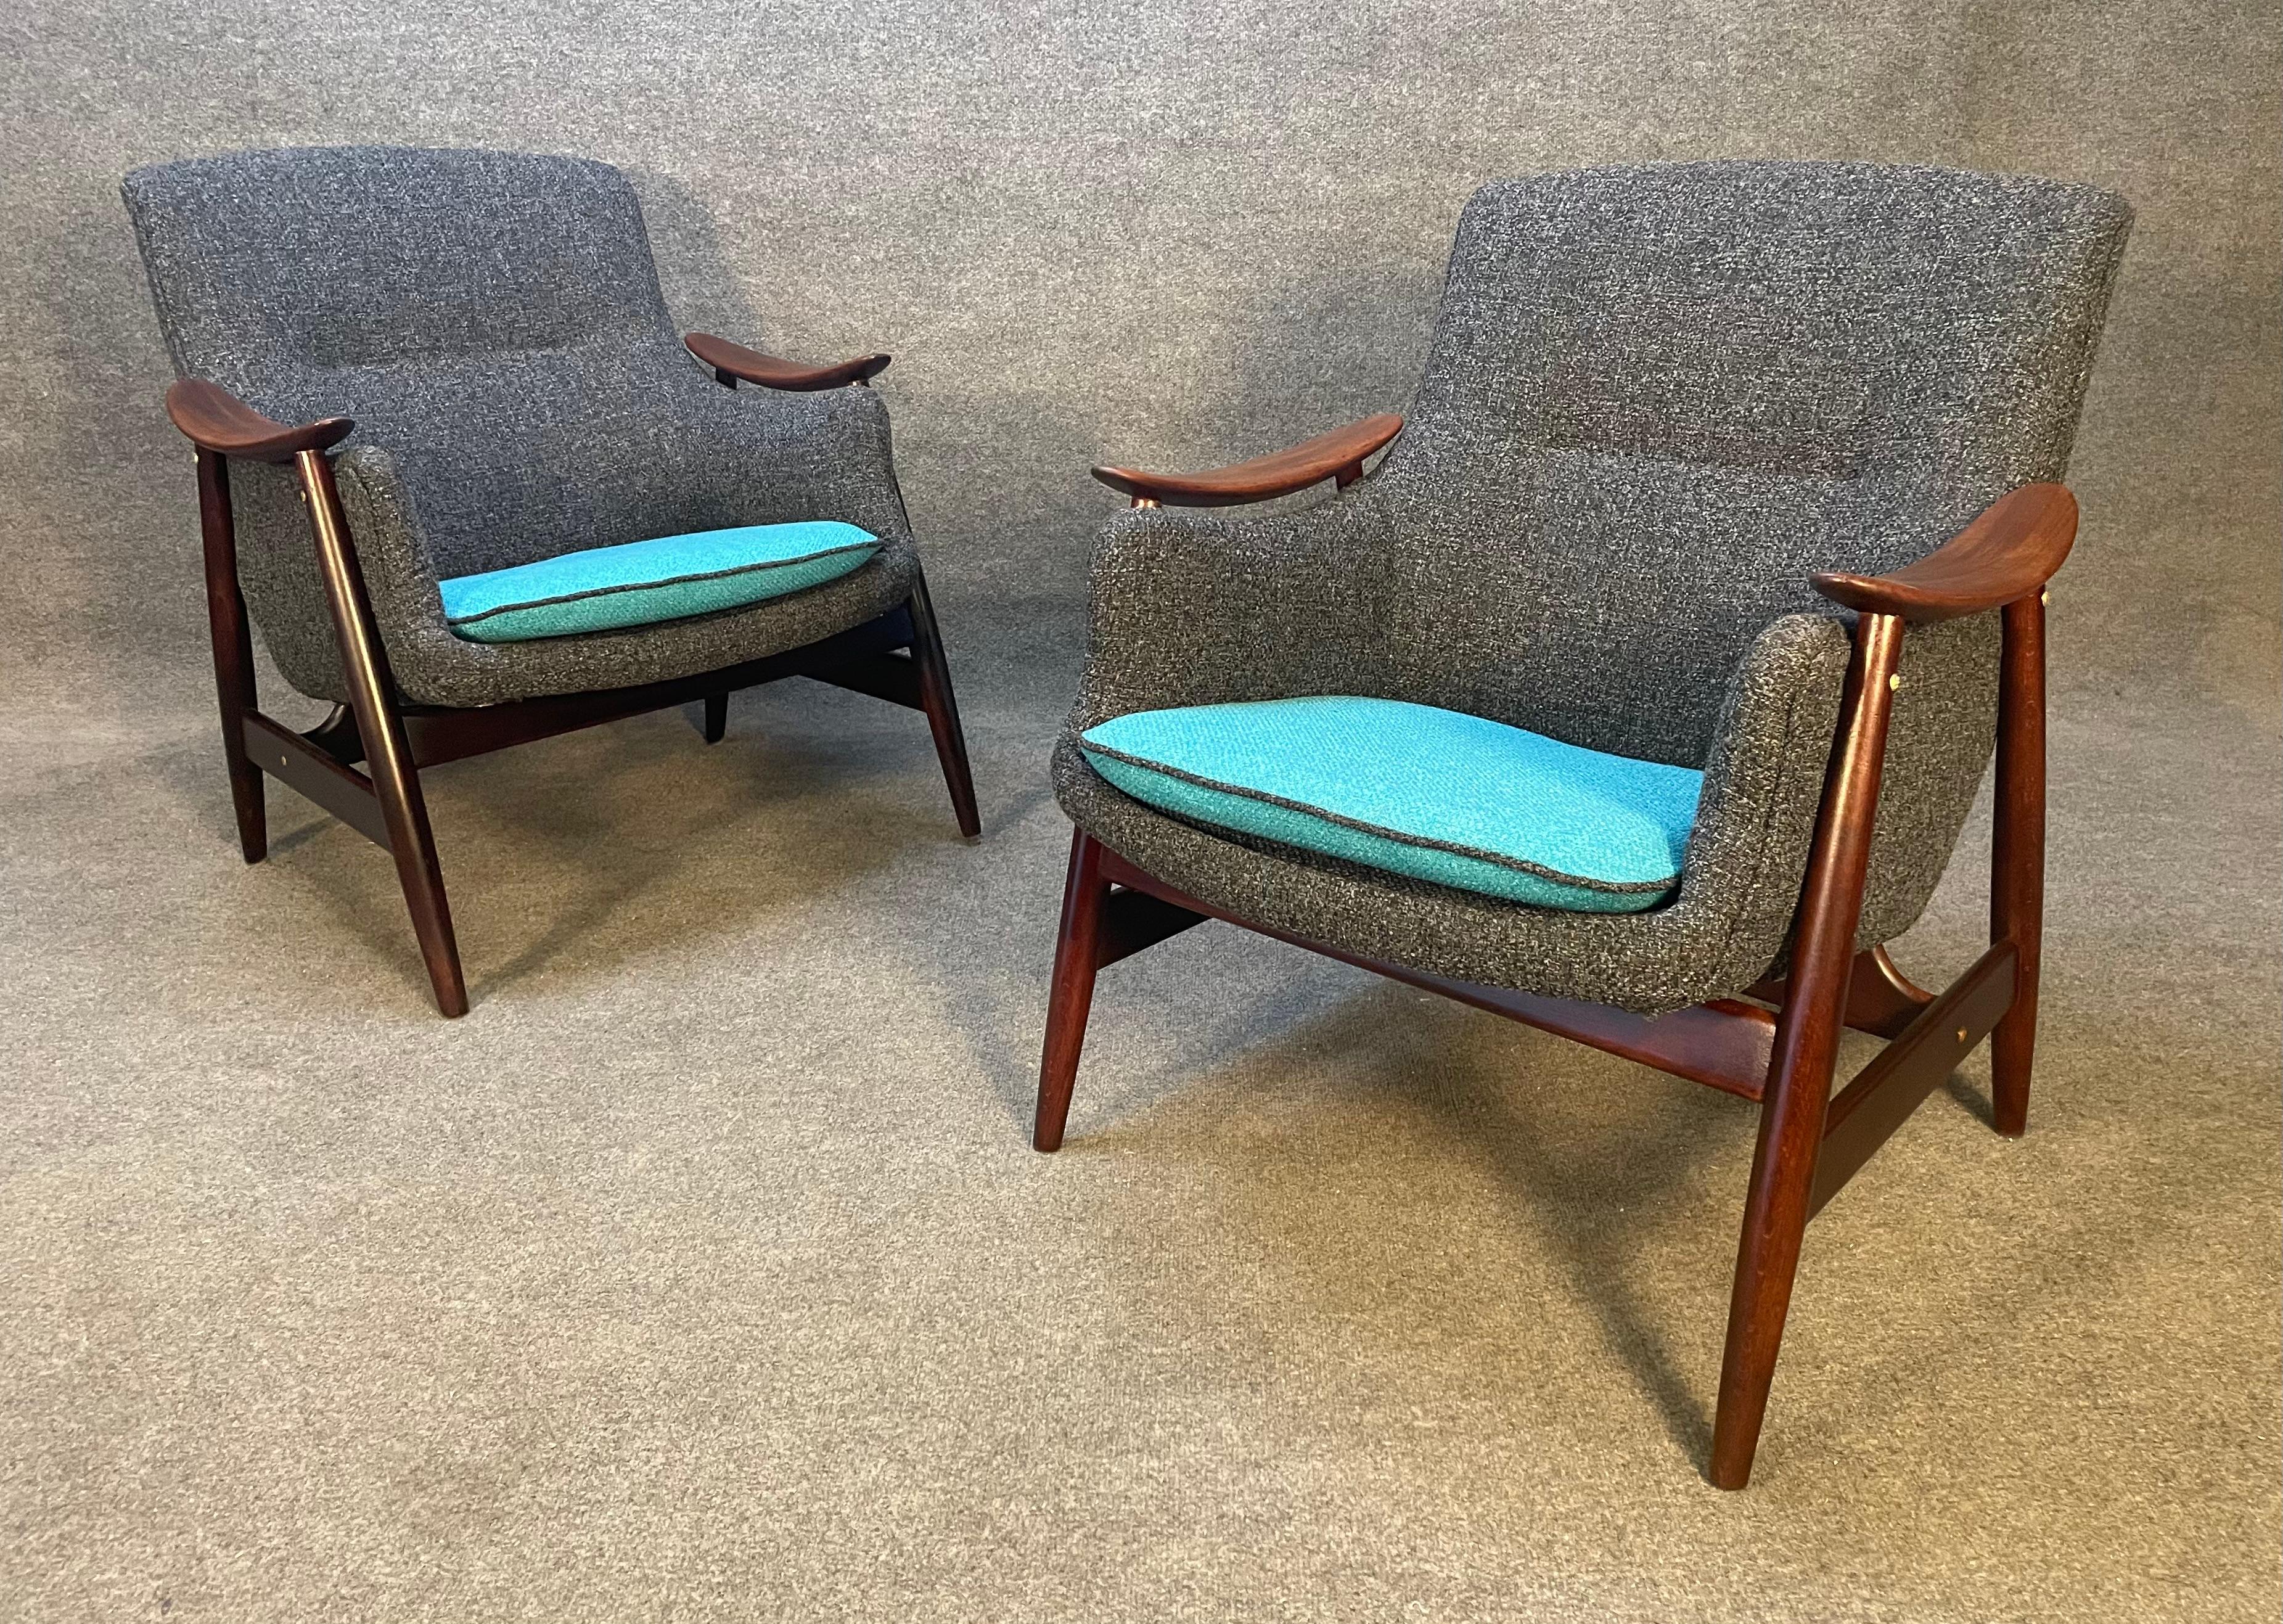 Here is a special set of two vintage scandinavian modern easy chairs in mahogany stained ash wood and teak designed by Gerhard Berg and manufactured by Vatne Mobelkfabrik in Norway in the 1960's.
These comfortable chairs, recently imported from